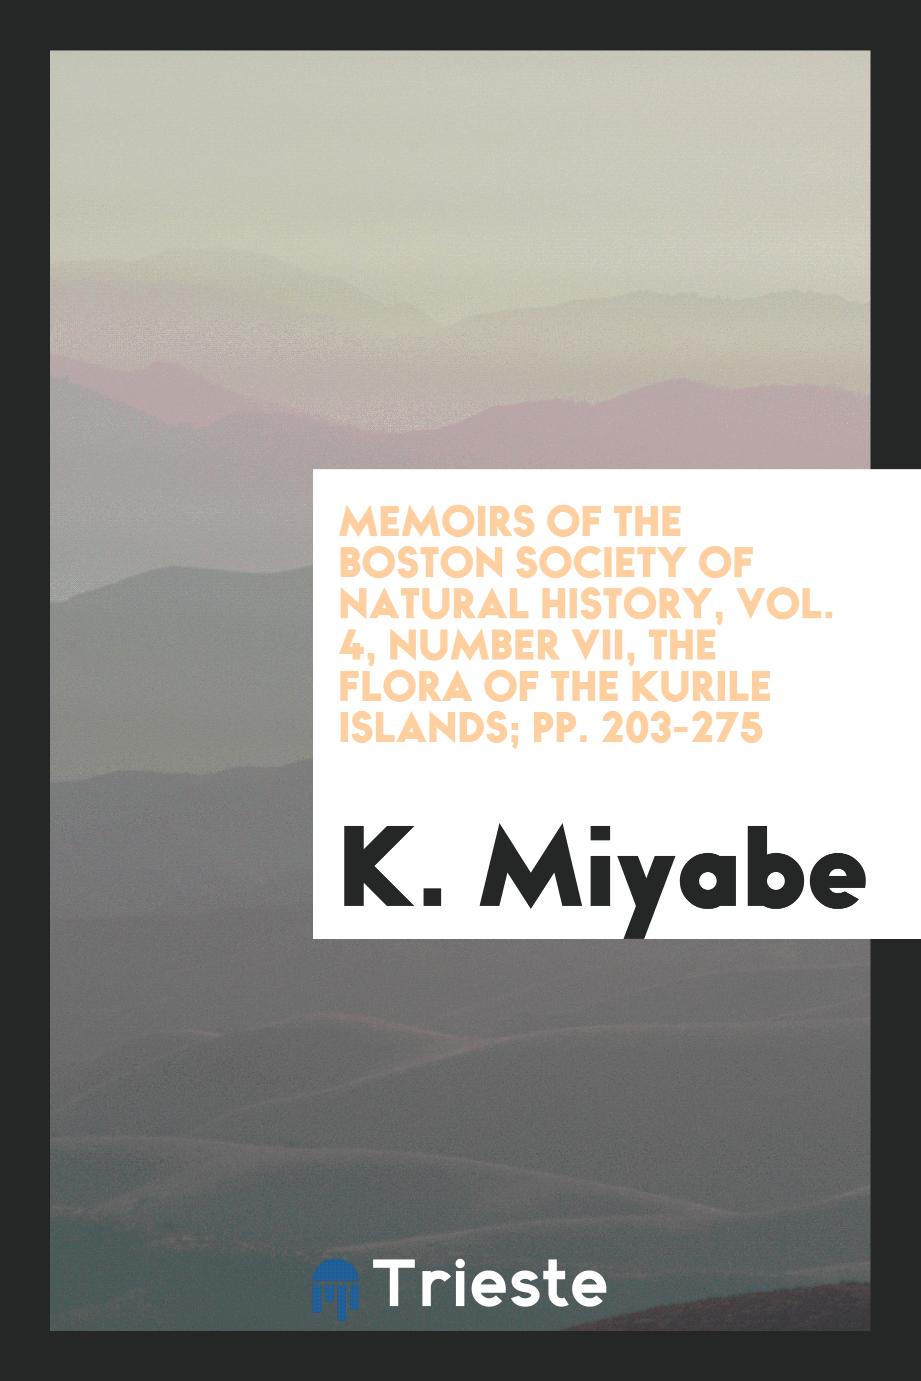 Memoirs of the Boston Society of natural history, Vol. 4, Number VII, The flora of the Kurile Islands; pp. 203-275